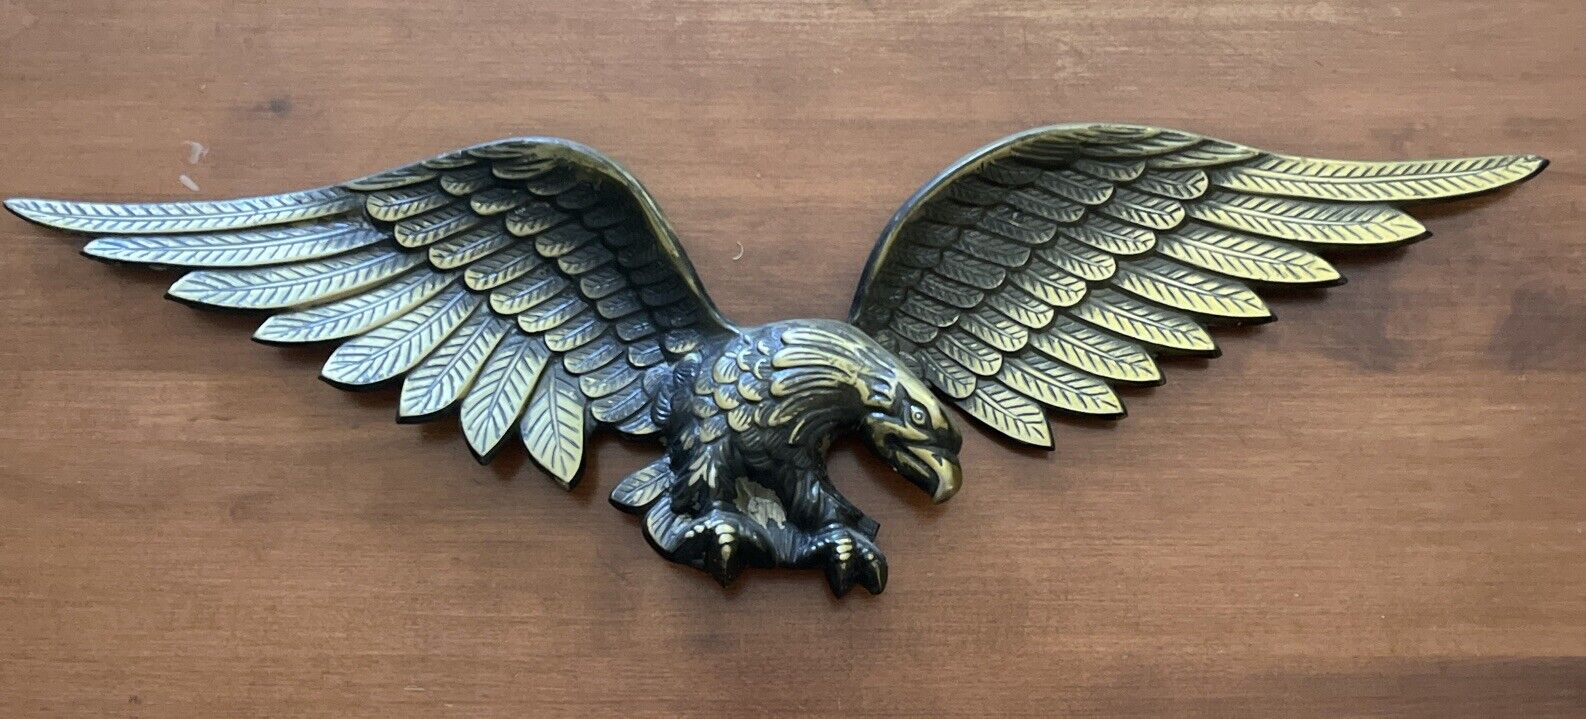 1960’s-70’s Flying Eagle Metal Wall Decor 31-1/2” Wingspan, Antique Brass Finish